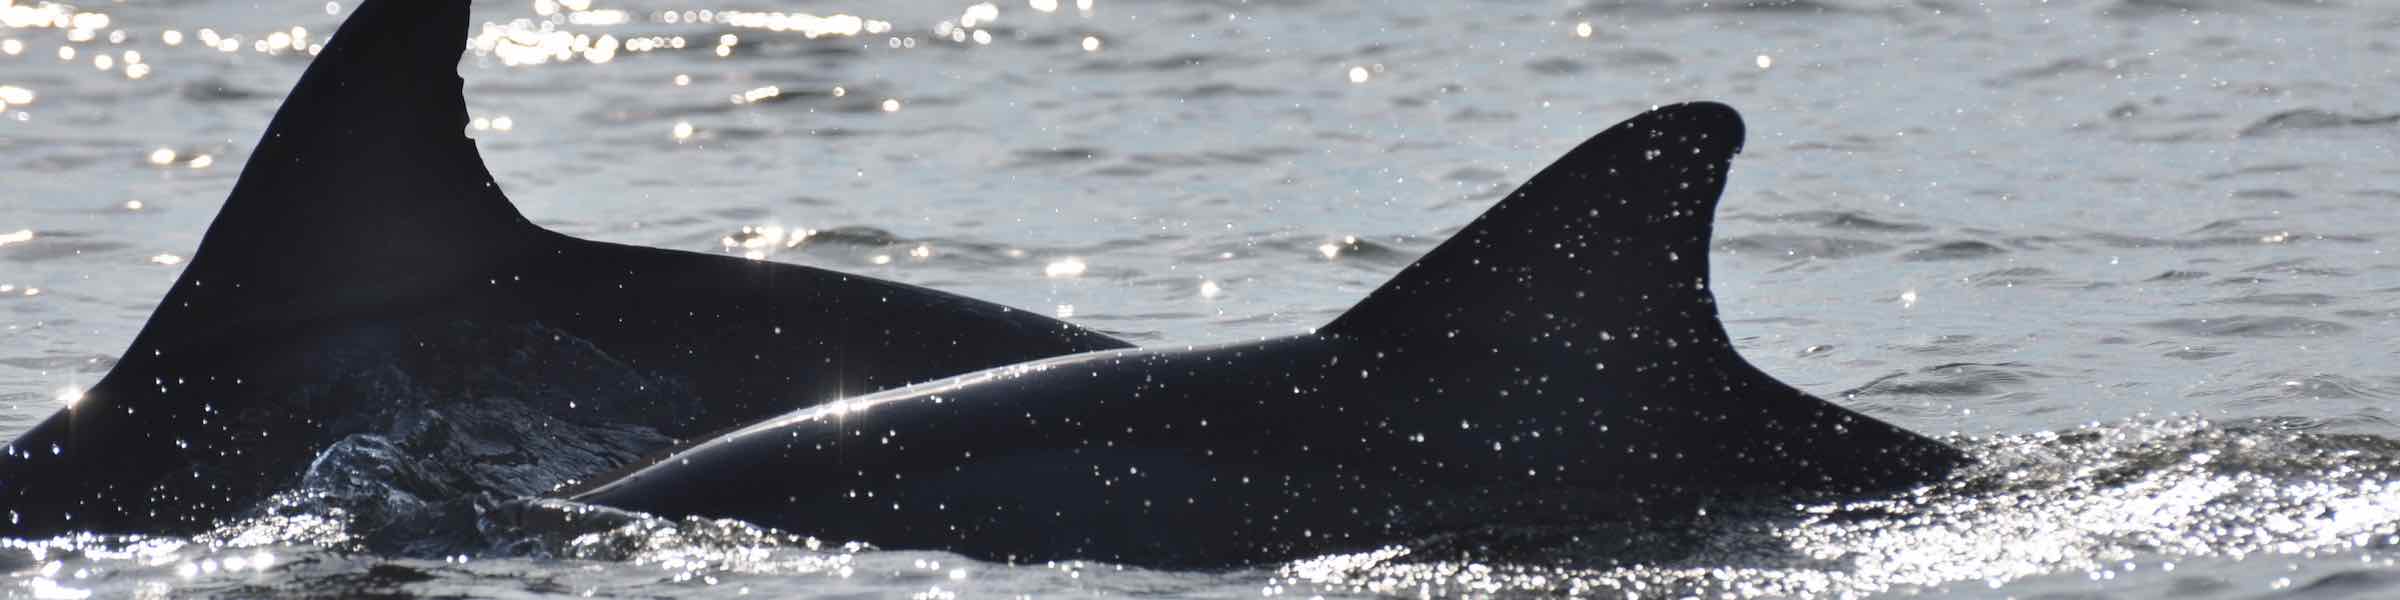 A pair of dolphins surfacing in Port Royal Sound, South Carolina.